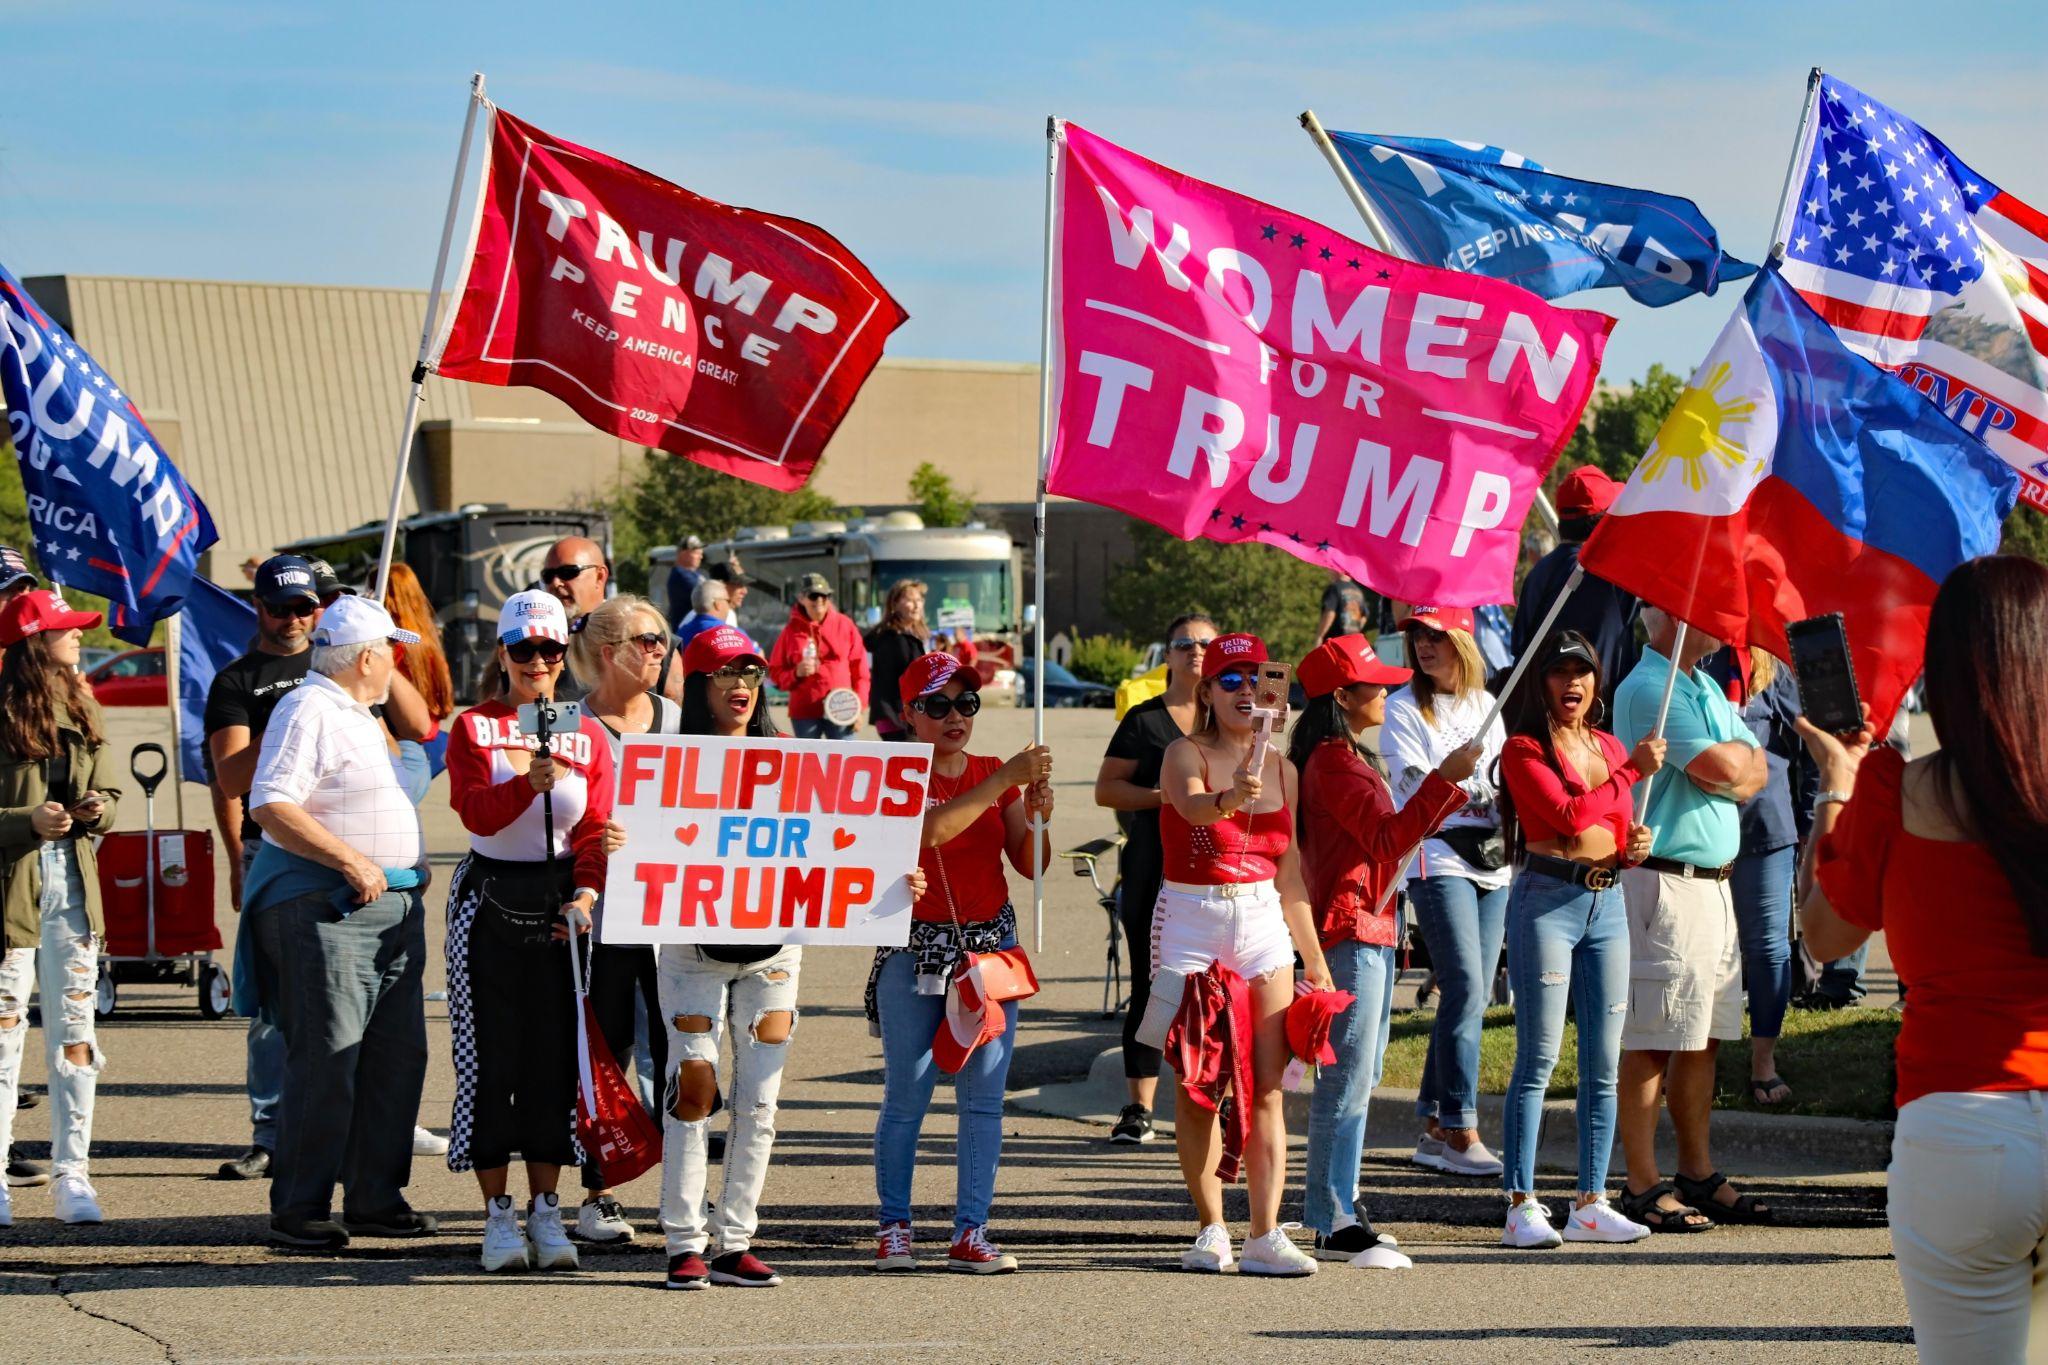 Crowd of people holding flags in support of Trump.